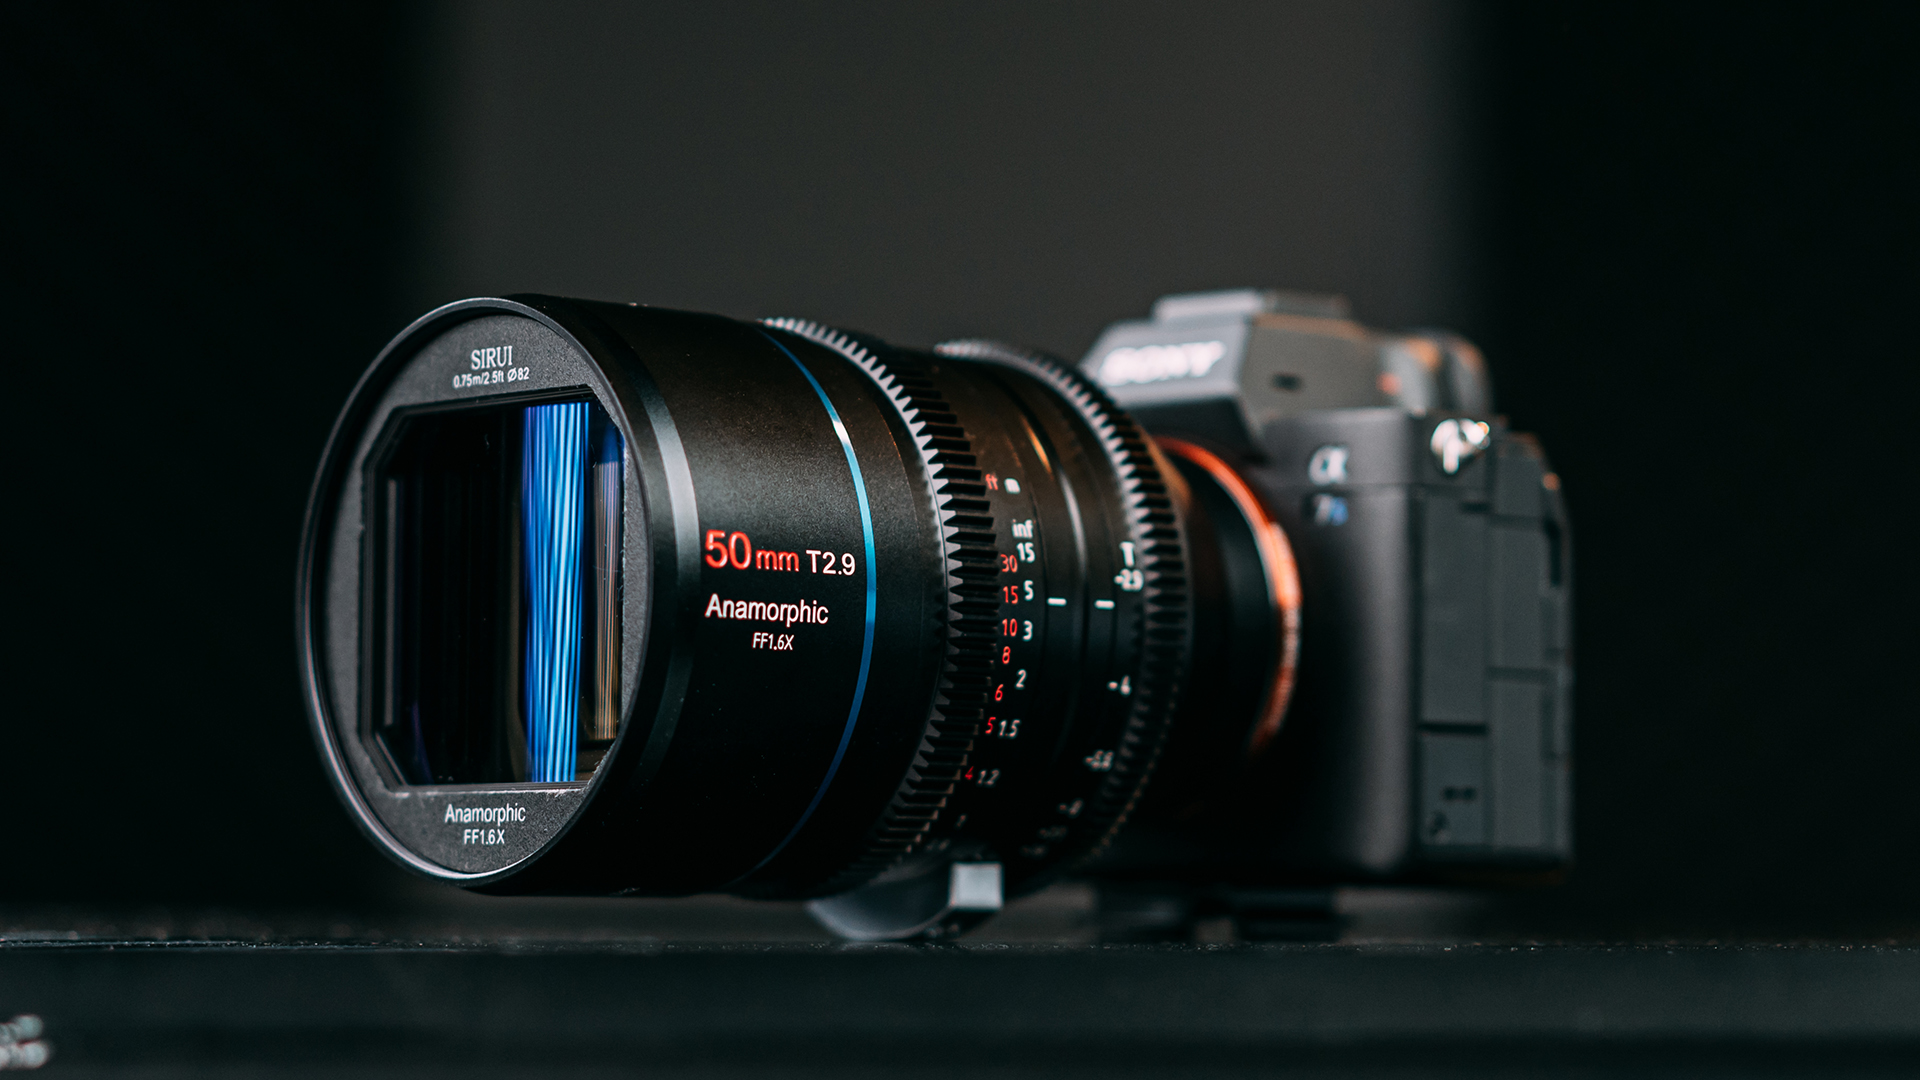 SIRUI 50mm T2.9 1.6x Full-Frame Anamorphic Lens Now on Indiegogo